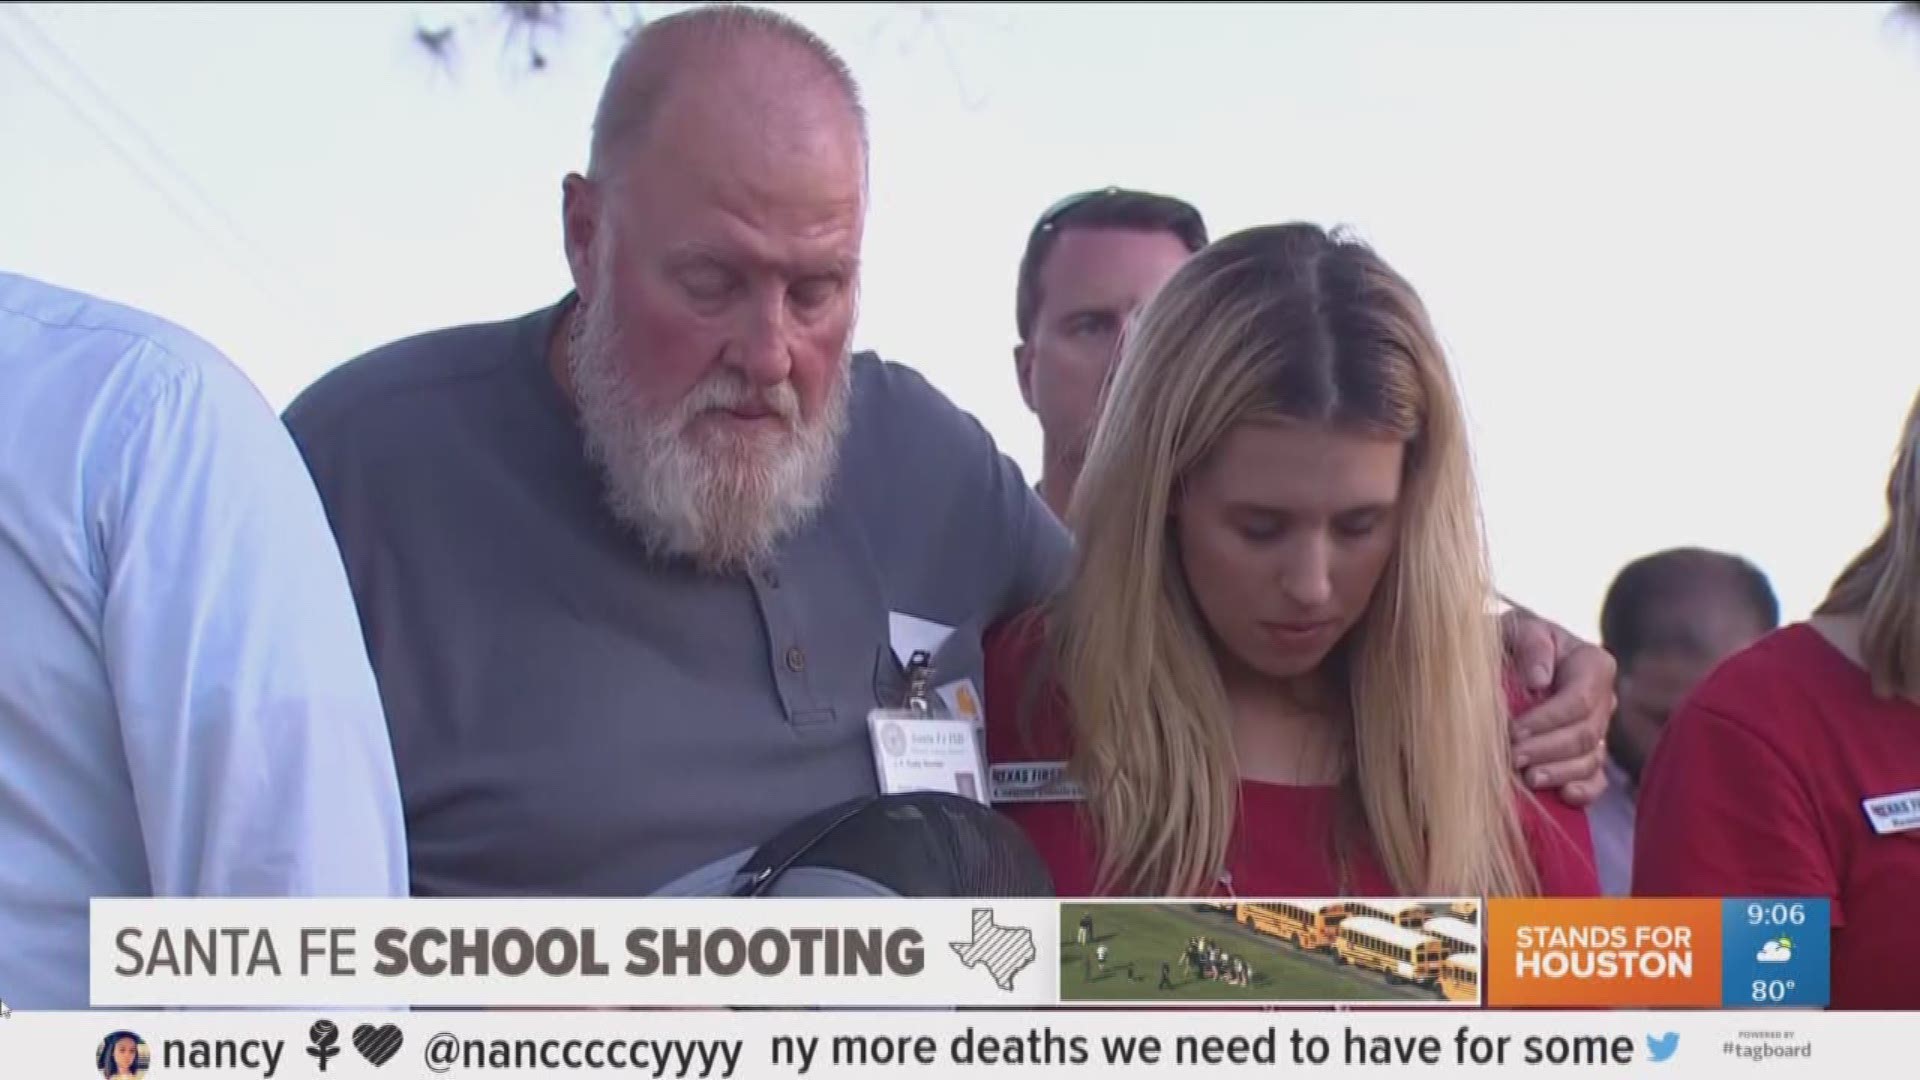 Watch the latest information from the Santa Fe High School shooting.